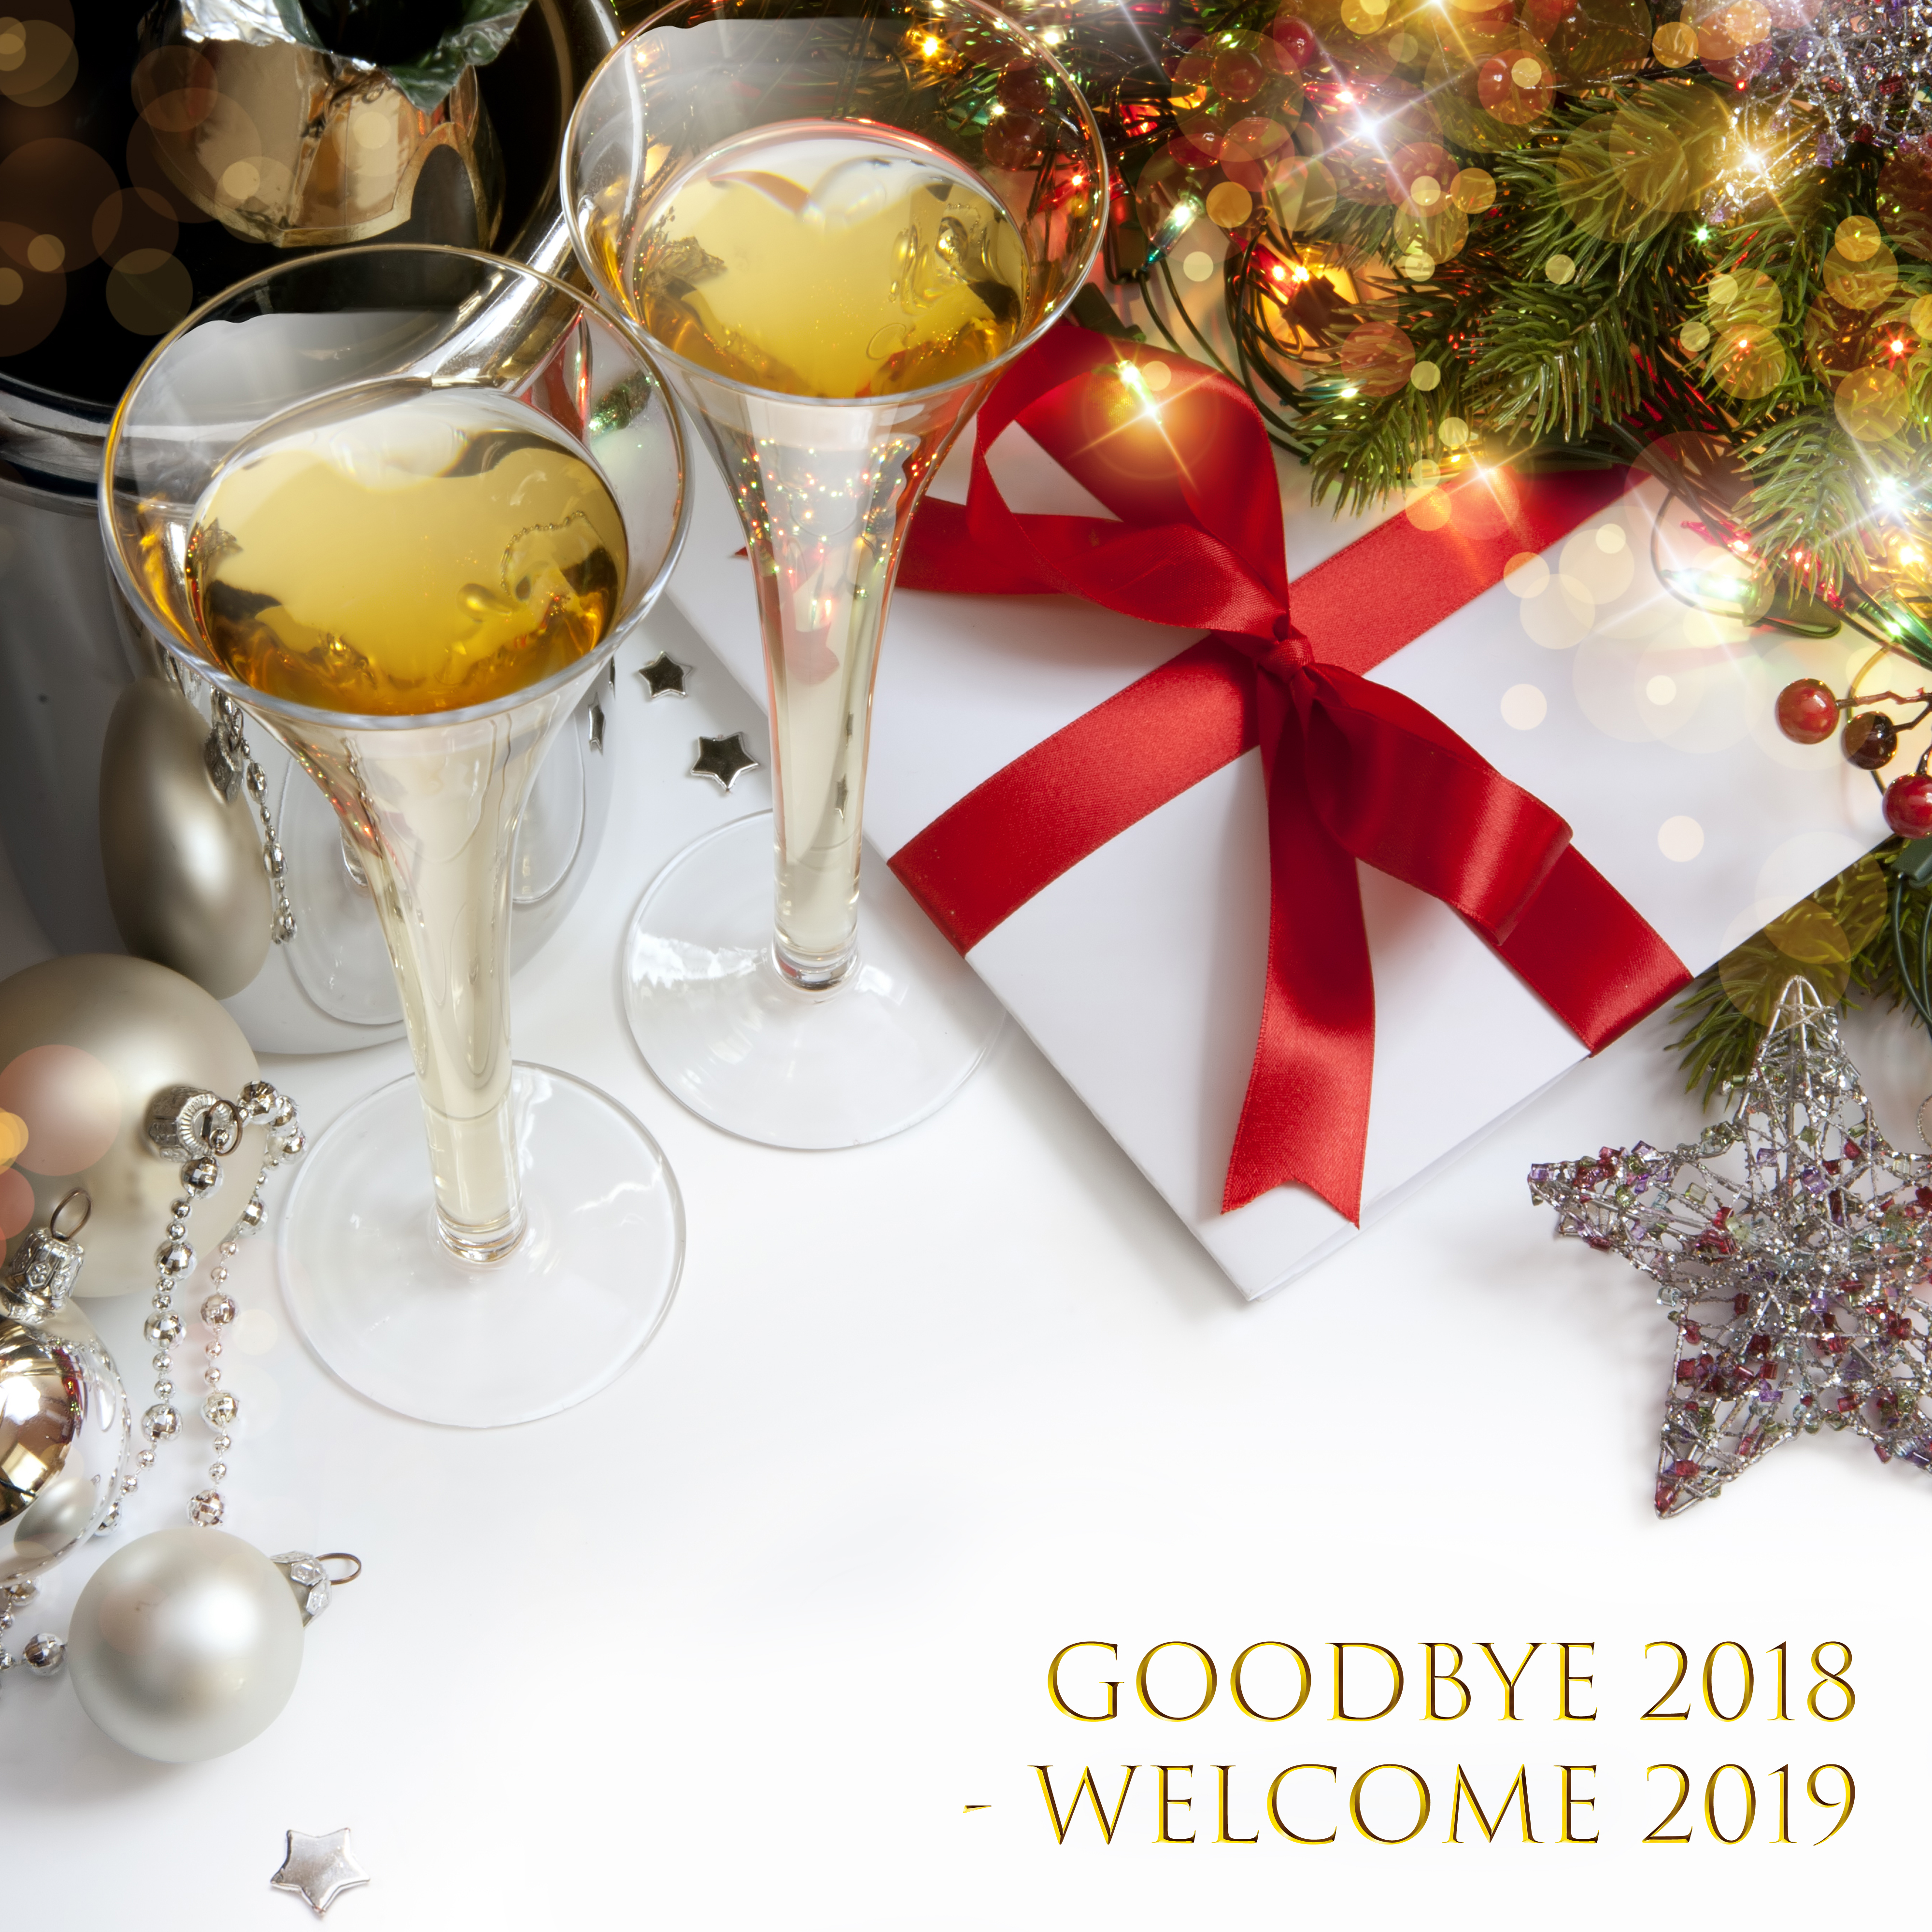 Goodbye 2018 - Welcome 2019 (New Year's Edition)